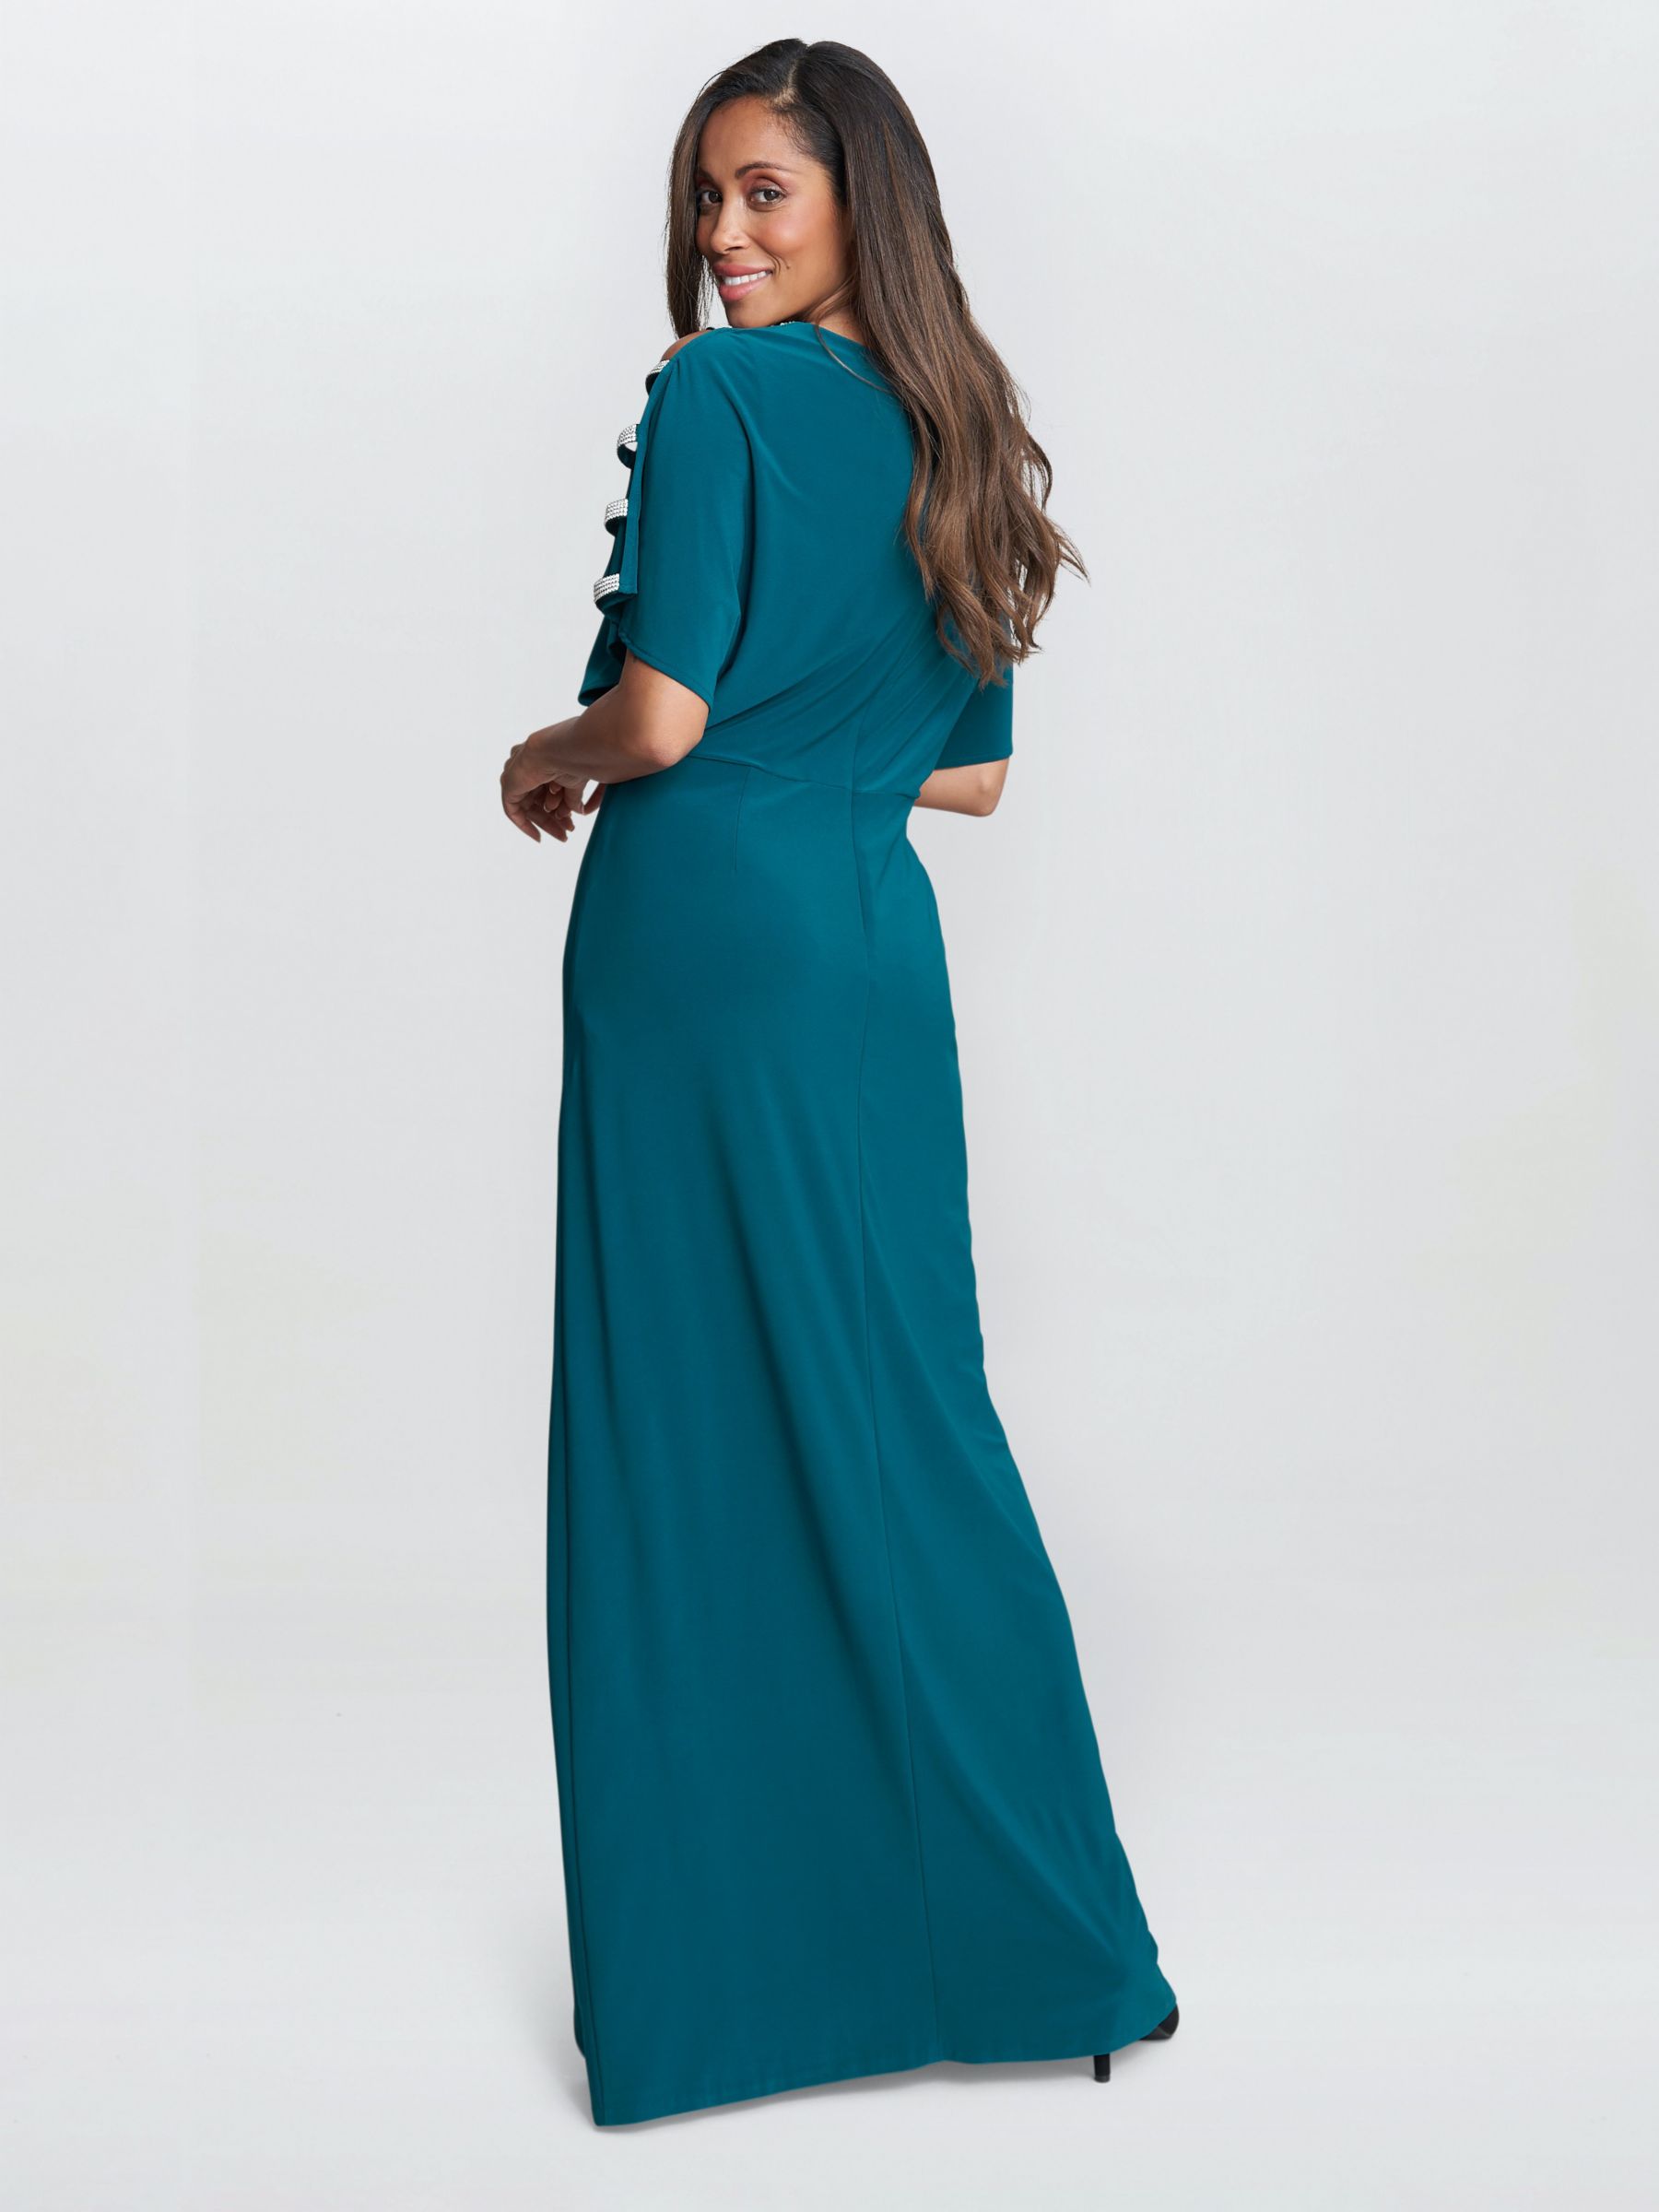 Buy Gina Bacconi Pascale Knot Front Maxi Dress, Emerald Online at johnlewis.com